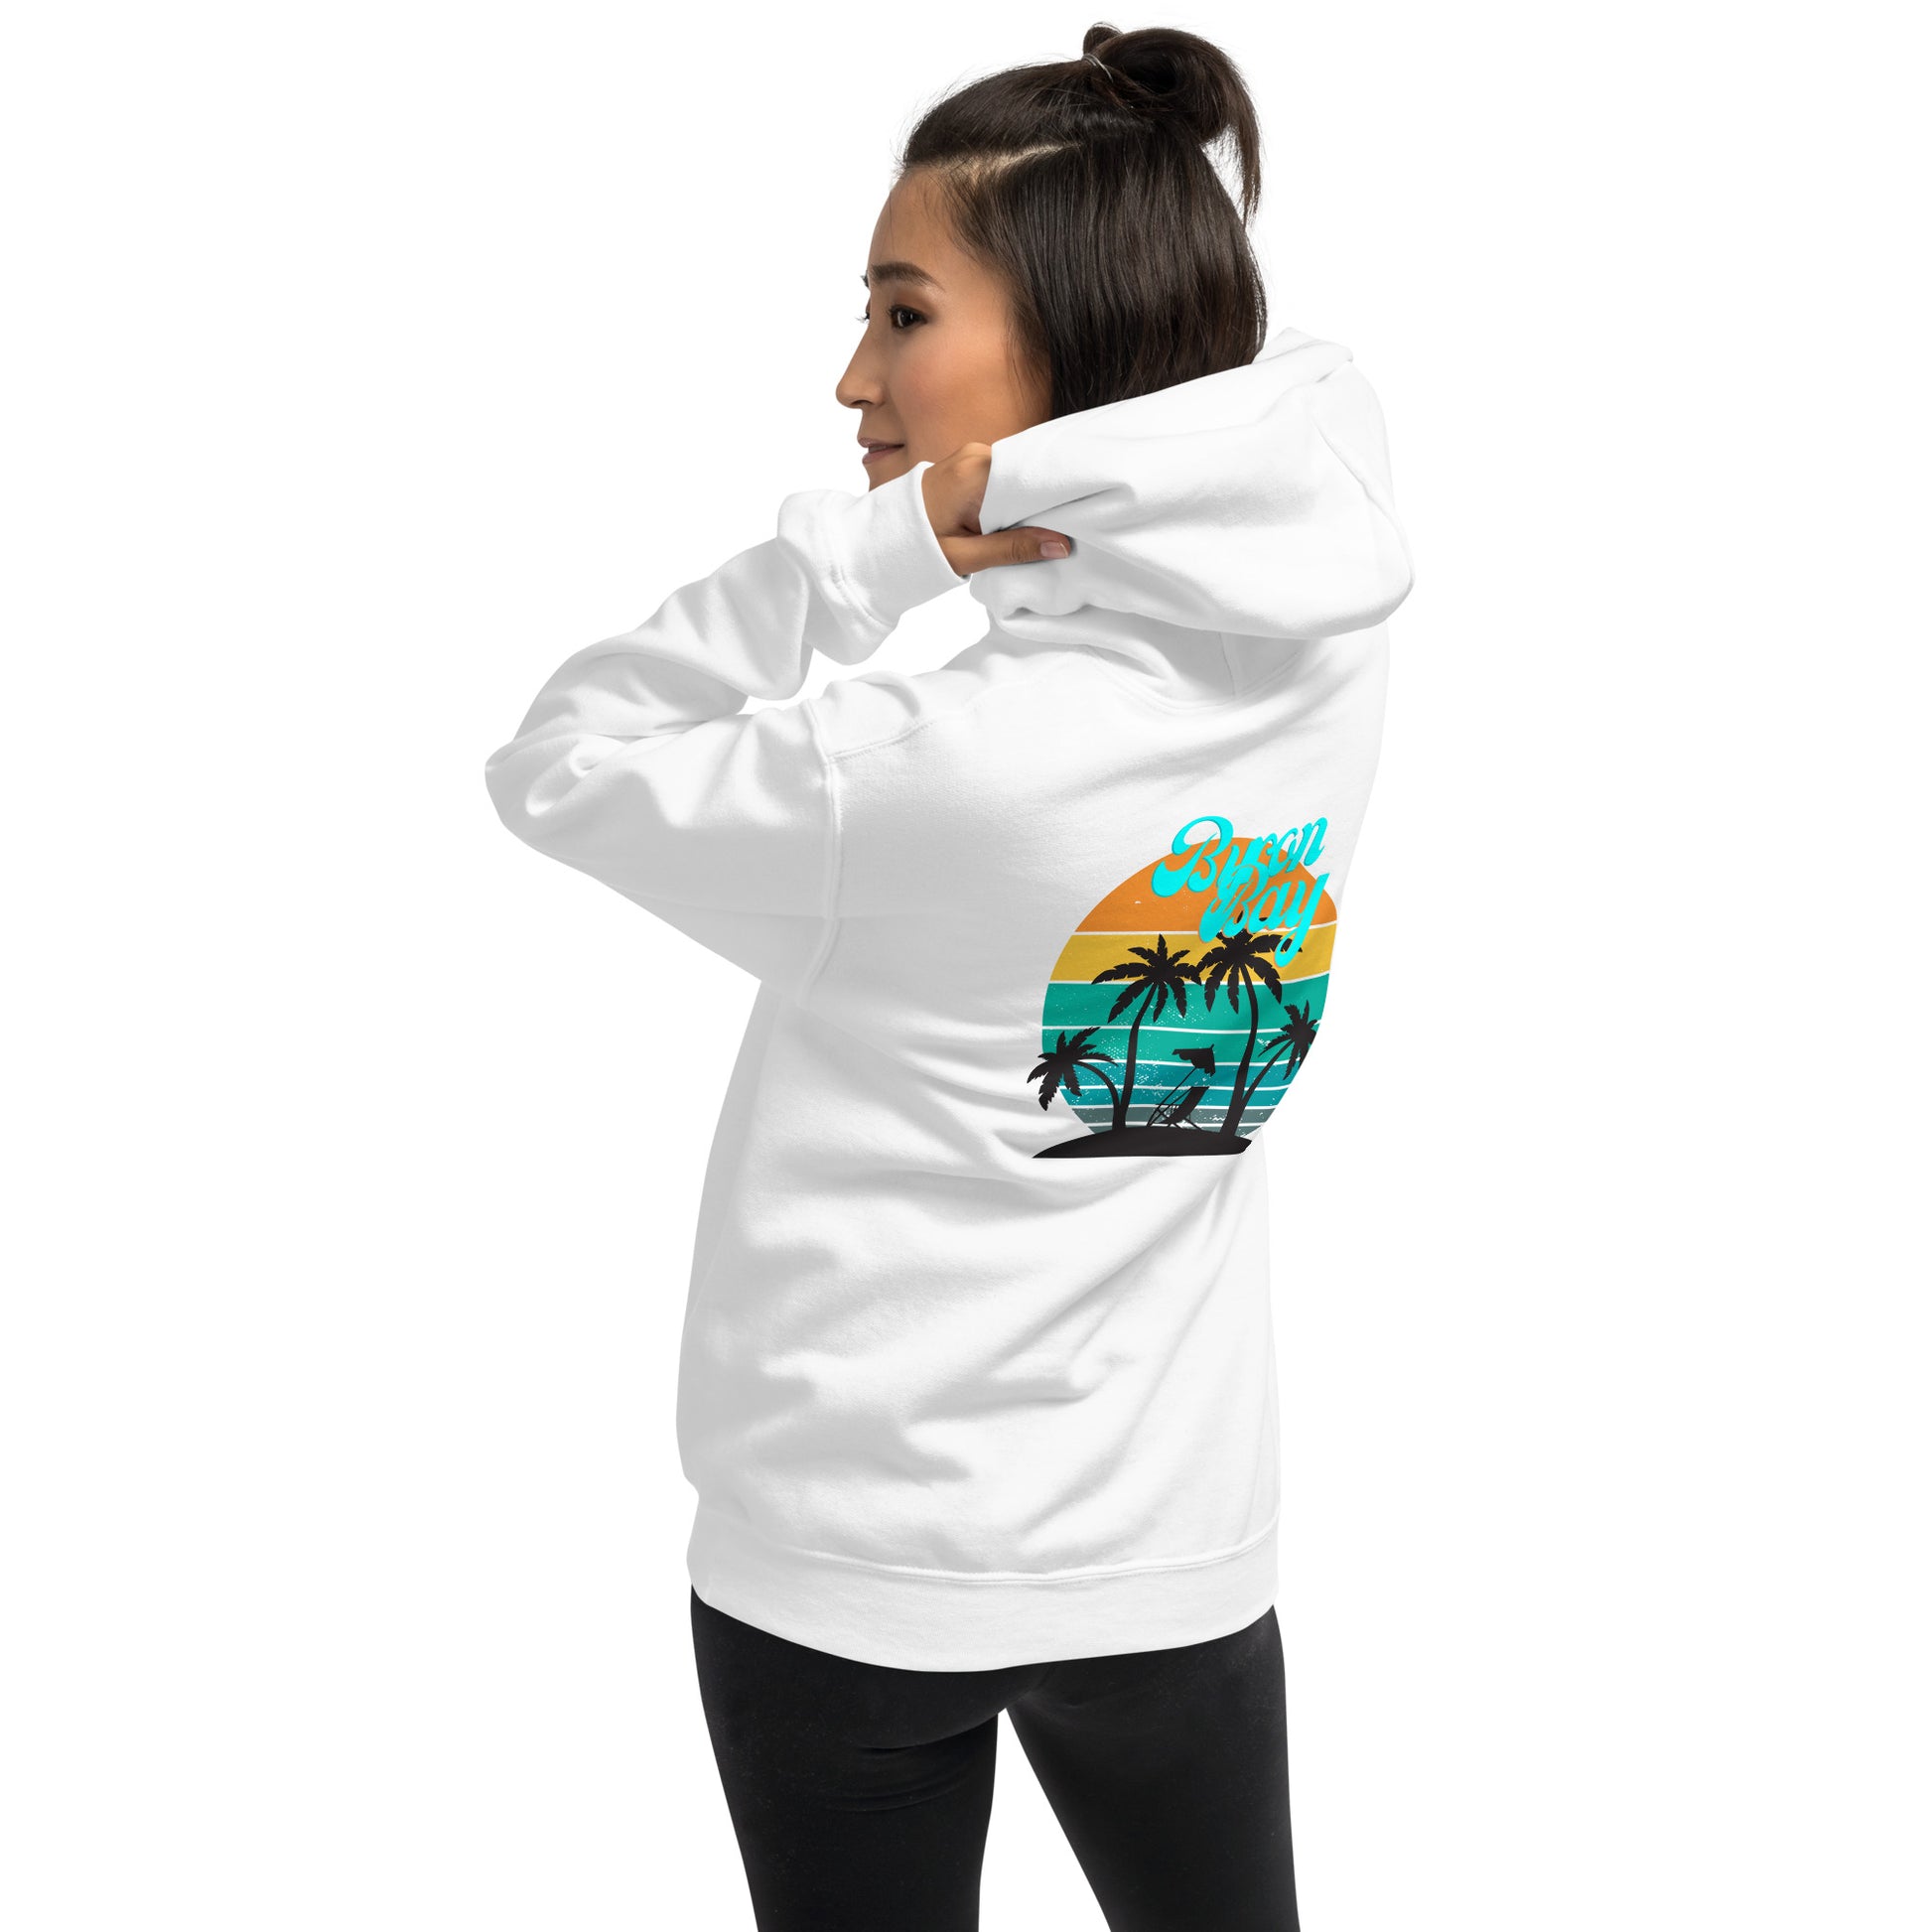  Unisex Hoodie - White - Back view being warn by woman pulling the hood on whilst looking over her shoulder - Byron Bay design on back, plain front with pouch pocket - Genuine Byron Bay Merchandise | Produced by Go Sea Kayak Byron Bay 